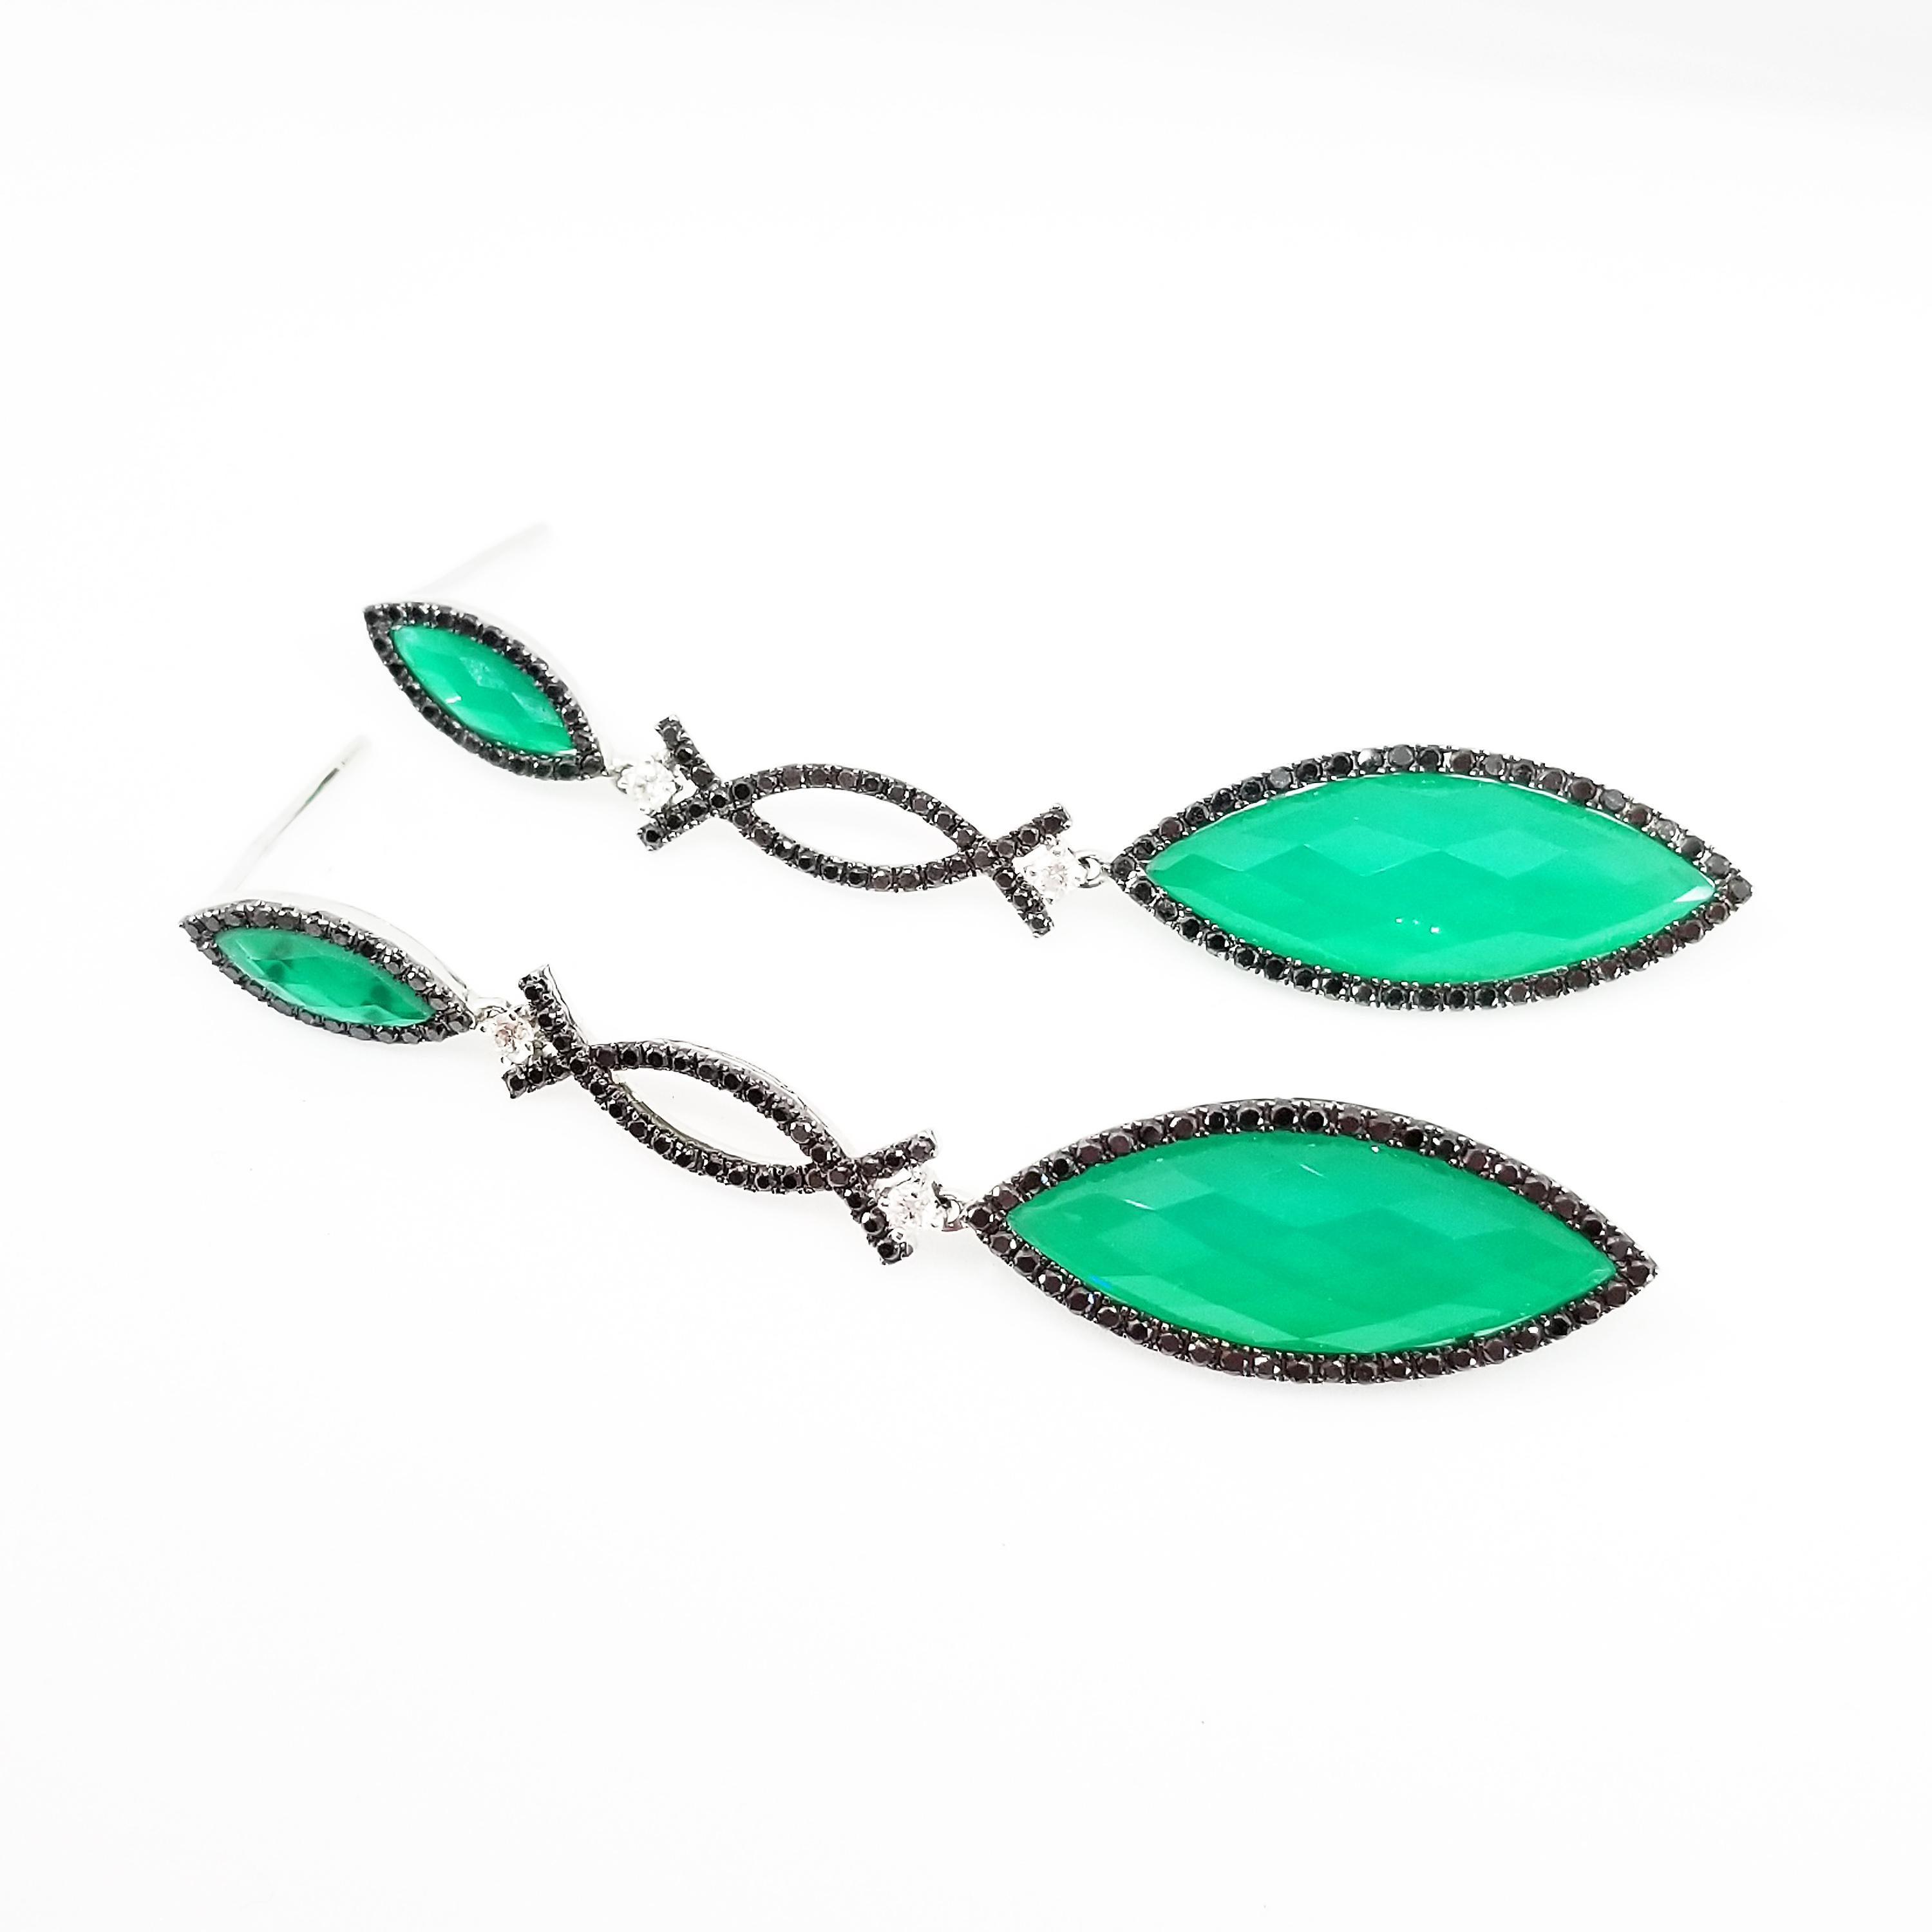 Brilliant Green Agate Drop Earrings in 18 Karat White Gold. The richly contrasting Dangle Earrings feature Elongated Marquise Green Agates, painstakingly faced with Rose Cut Faceted, Clear White Topaz for Light Catching Sparkle and beautiful